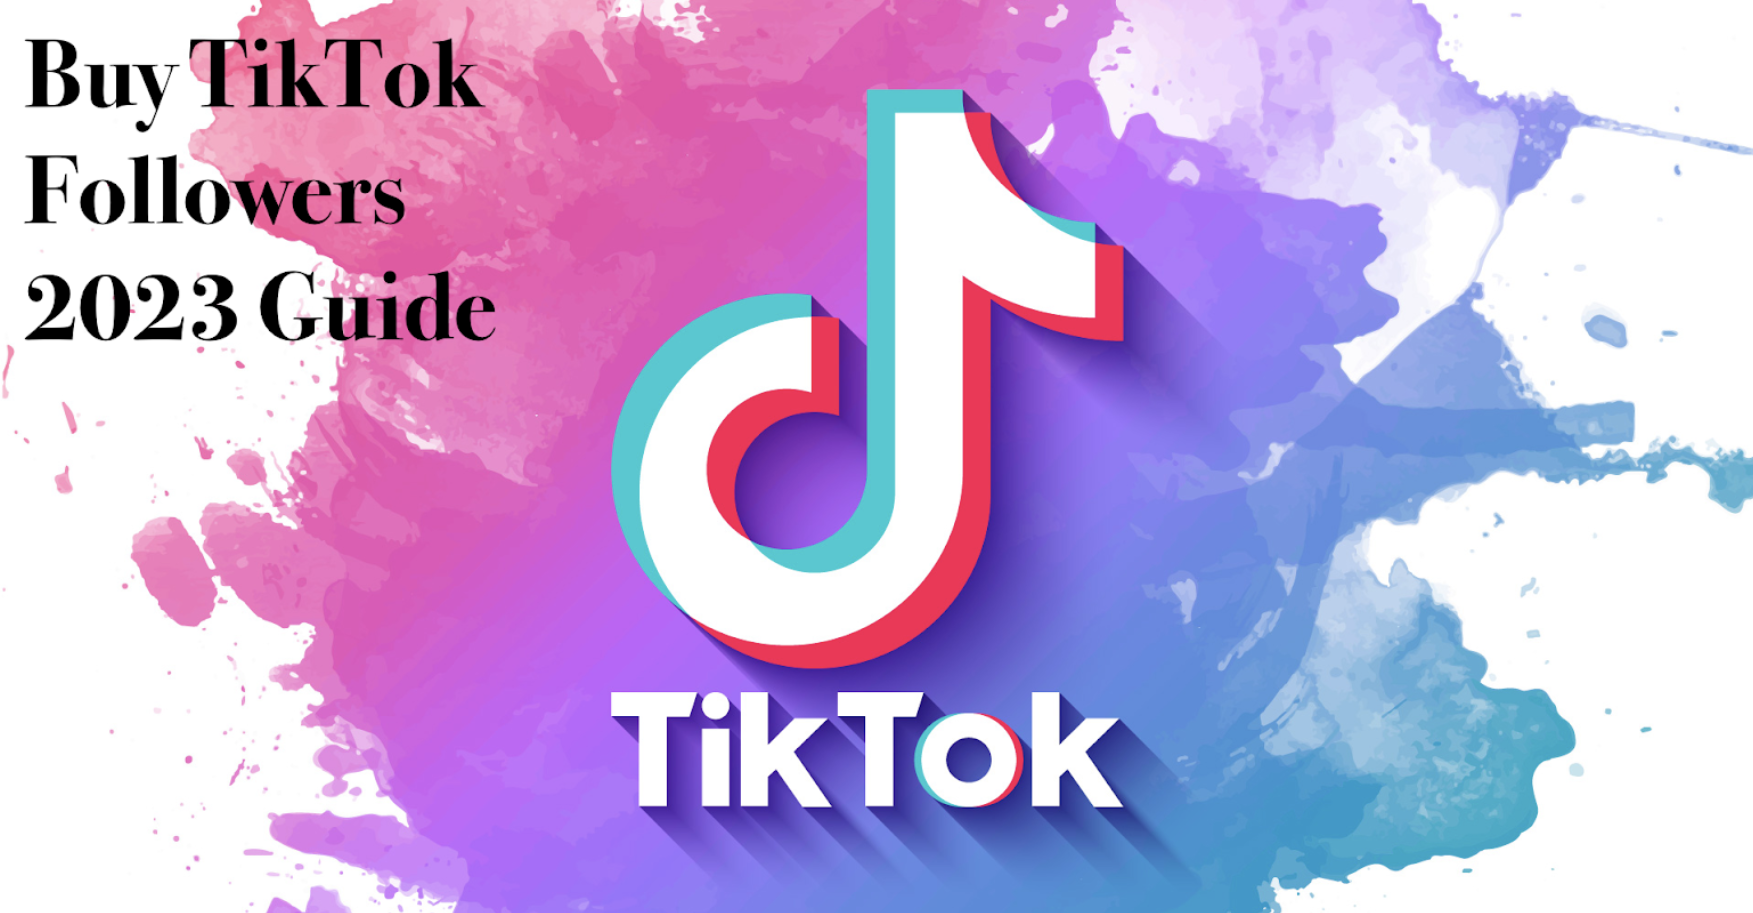 How to Buy TikTok Followers – The Ultimate 2023 Strategy